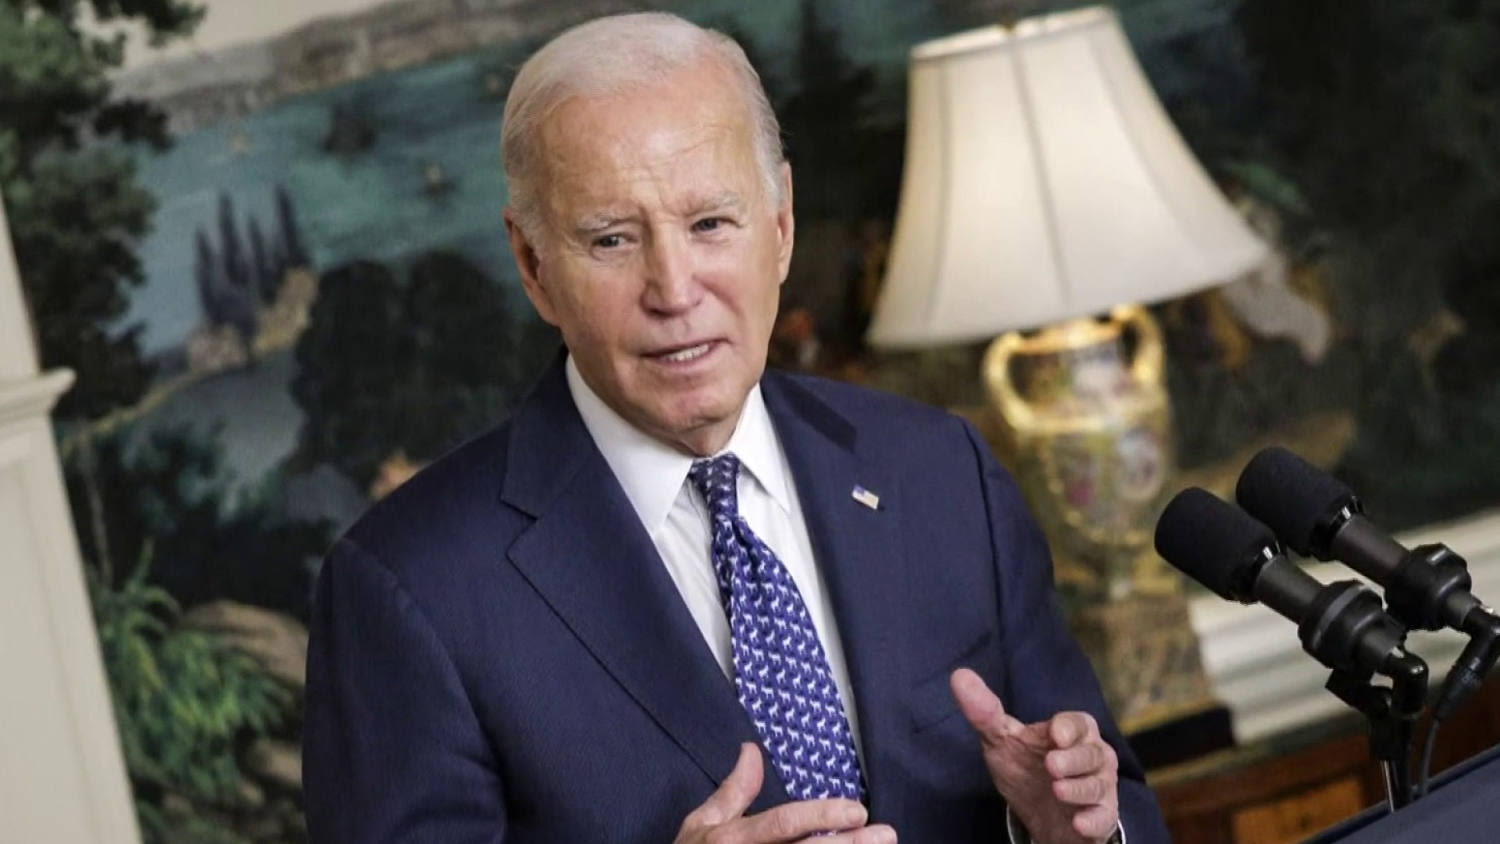 'Blocking and tackling often wins elections': Lemire on Biden's campaign strategy